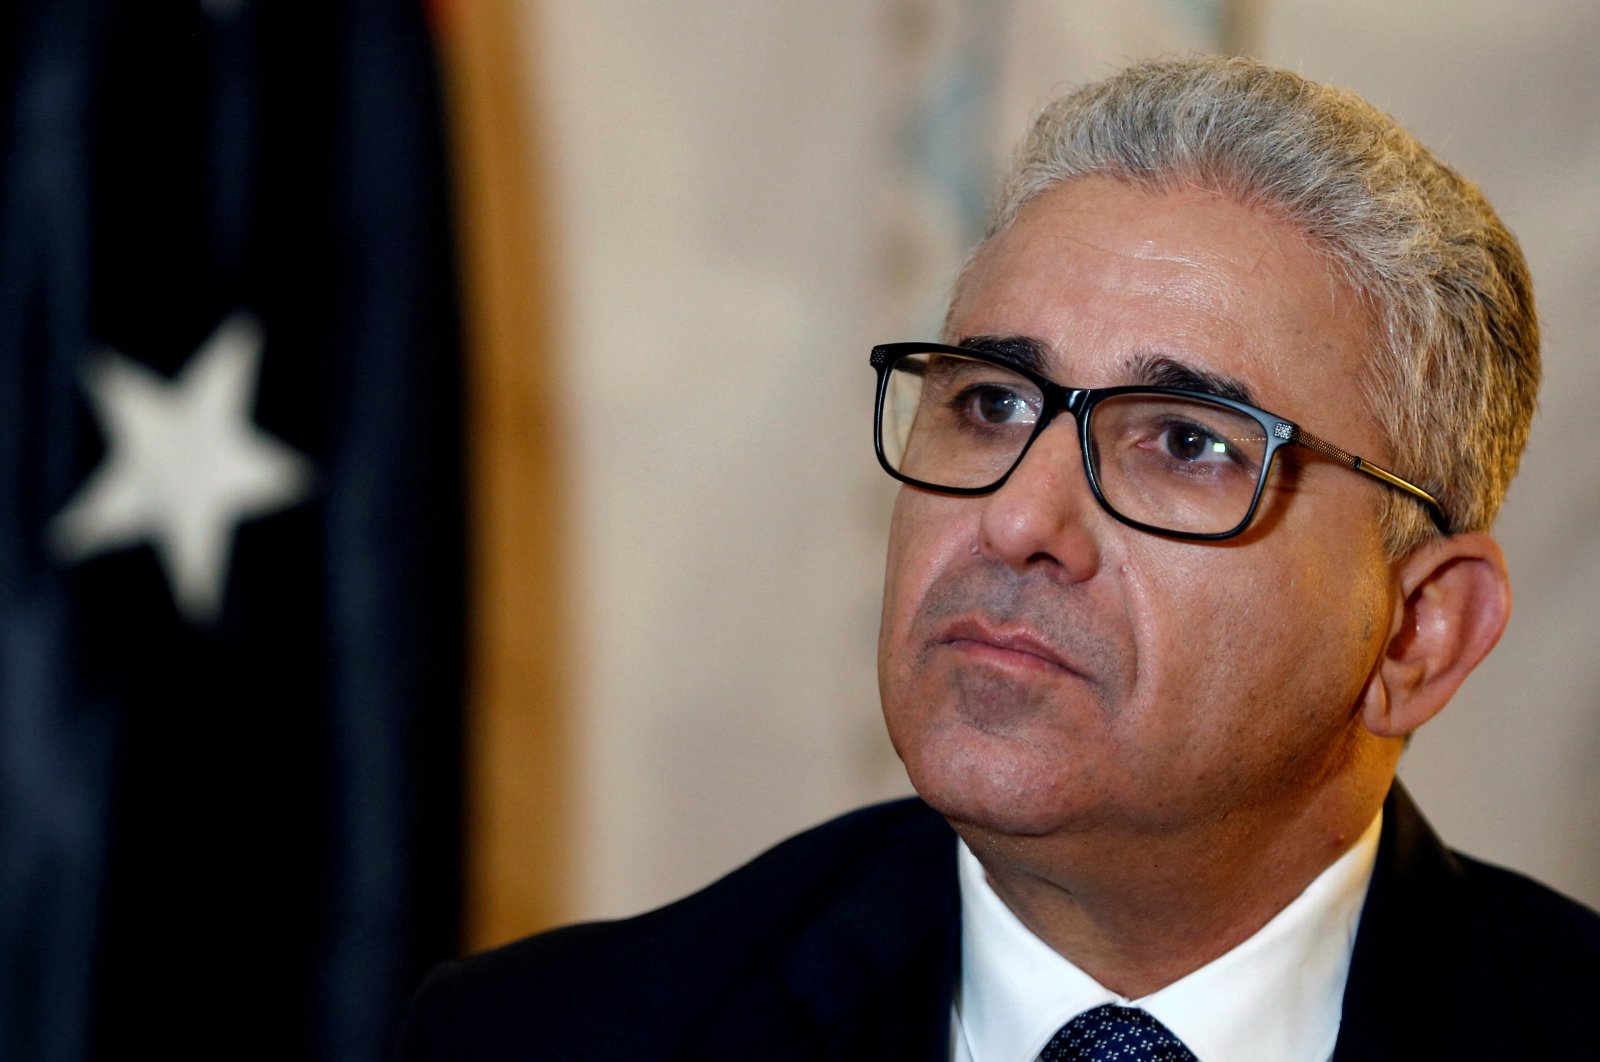 Libya's parliament has appointed Bashagha as its new prime minister